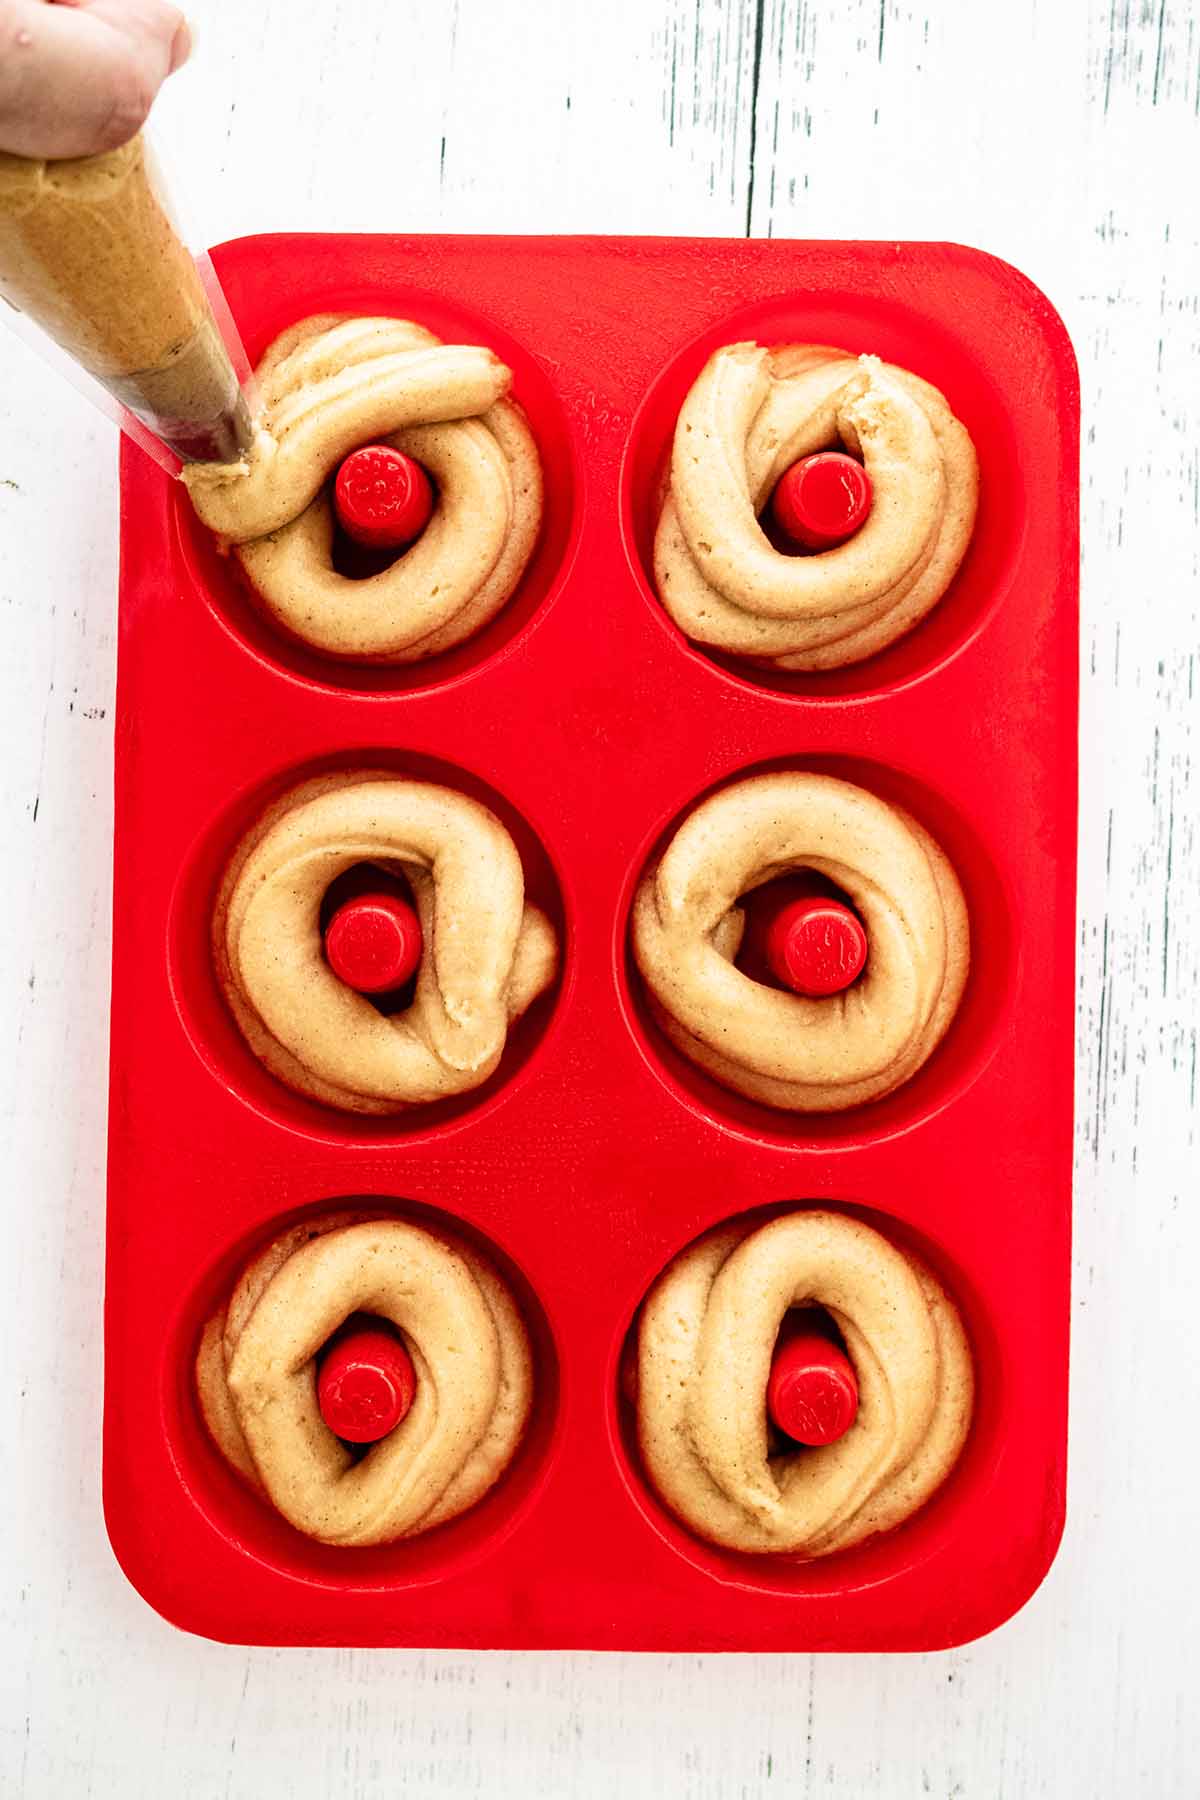 Donut batter being piped into a red silicone donut pan.